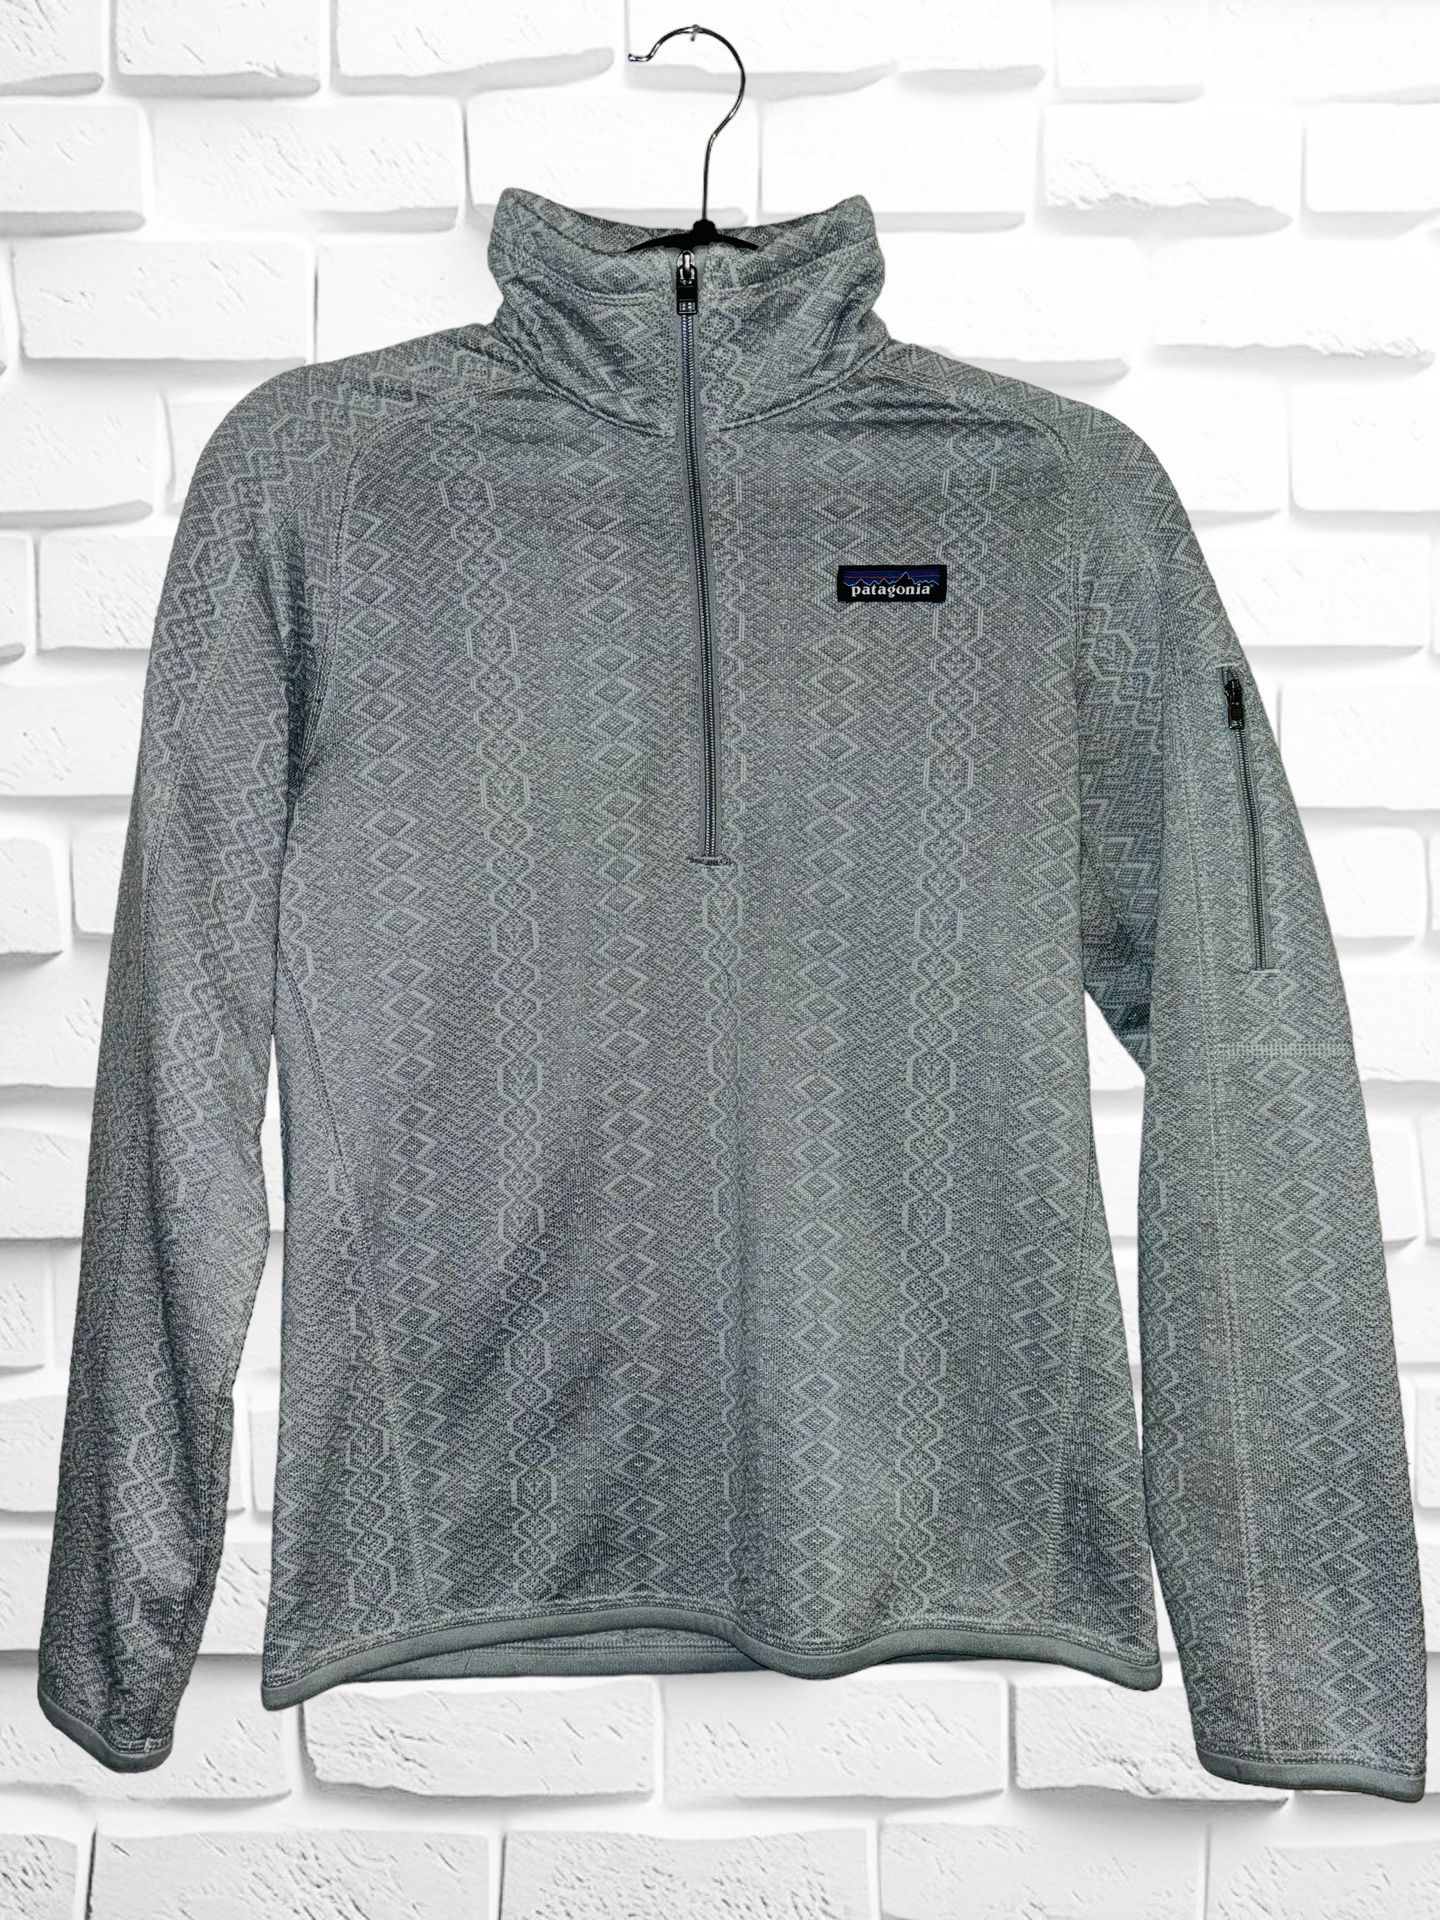 Patagonia Womens Small Better Sweater 1/4 Zip Pullover Jacquard Jacket Salt Gray